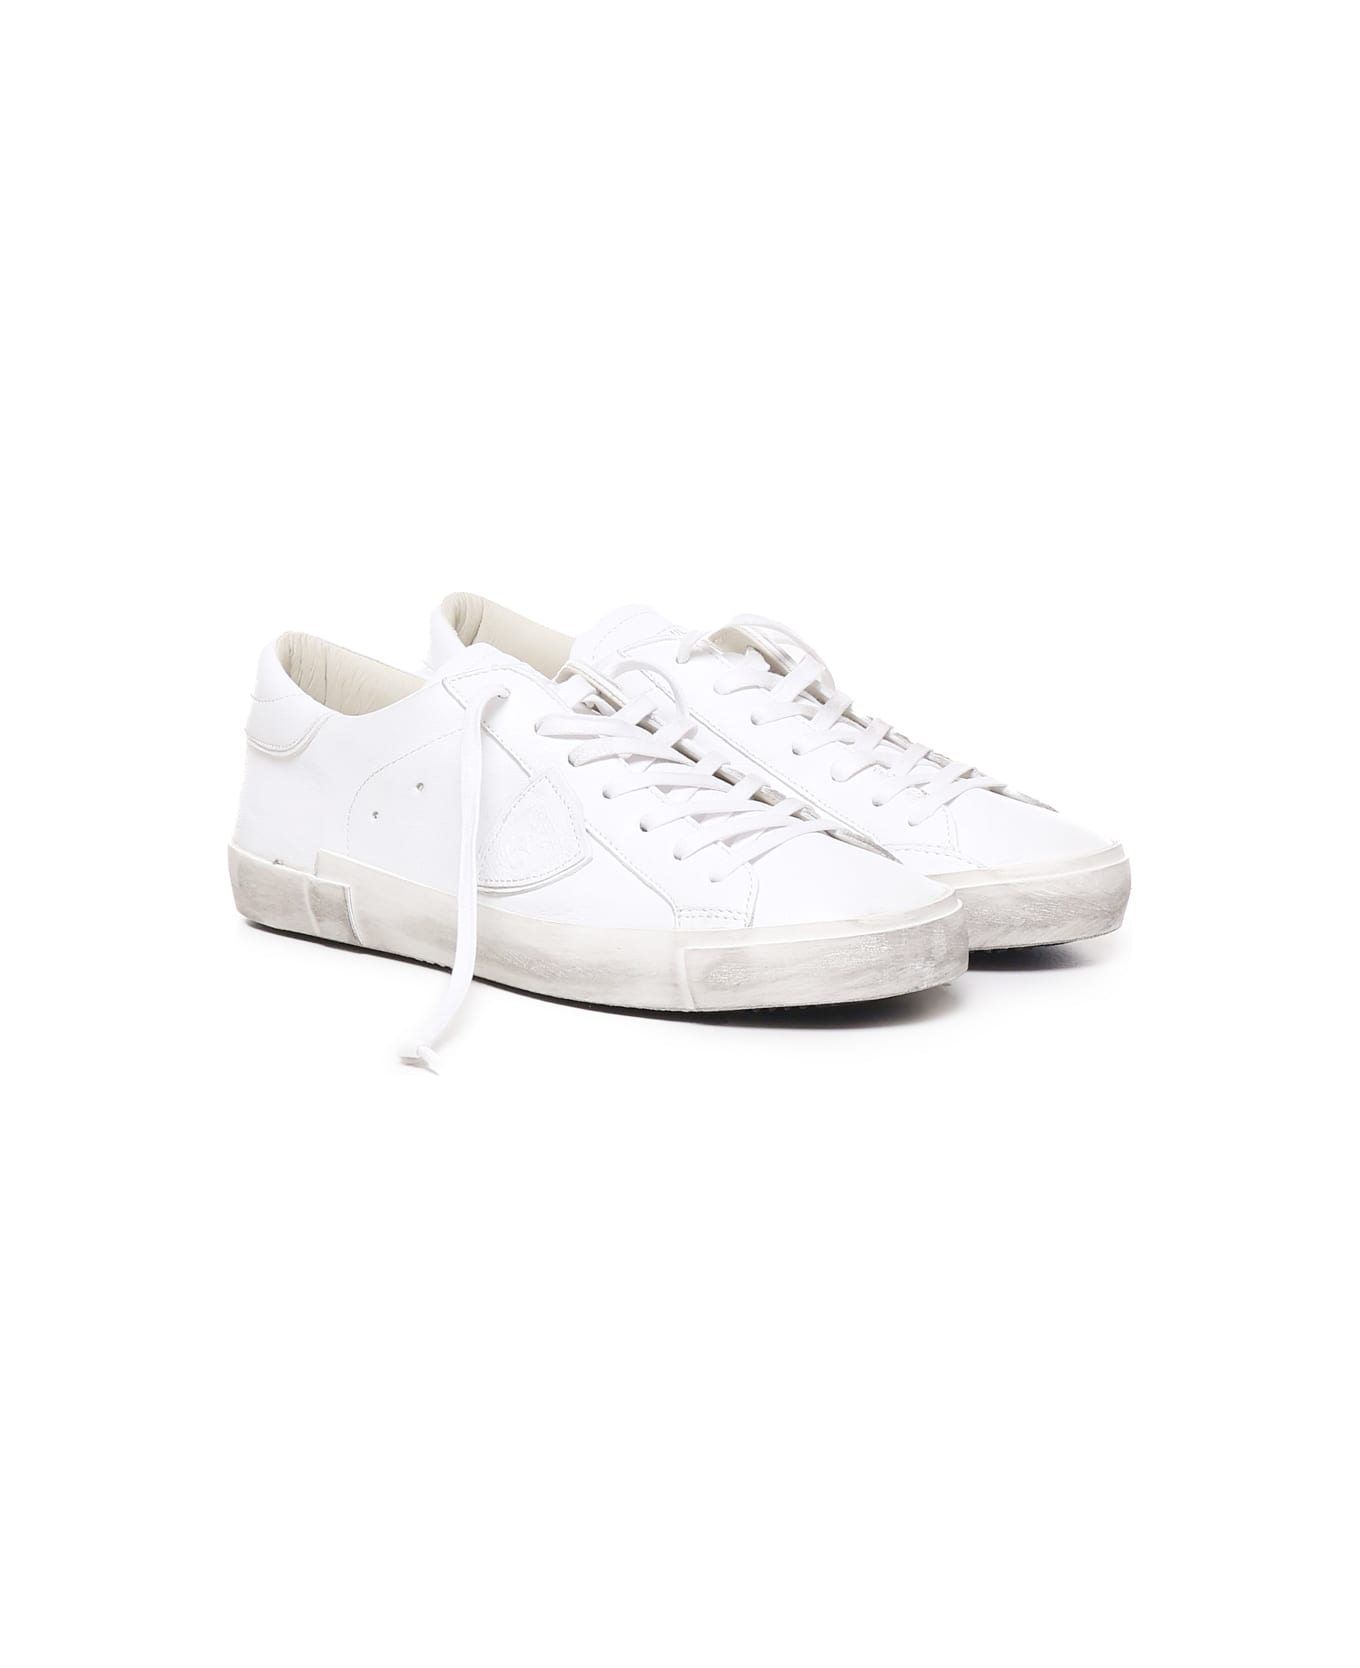 Philippe Model Sneakers With Prsx Lived-in Effect - BASIC_BLANC